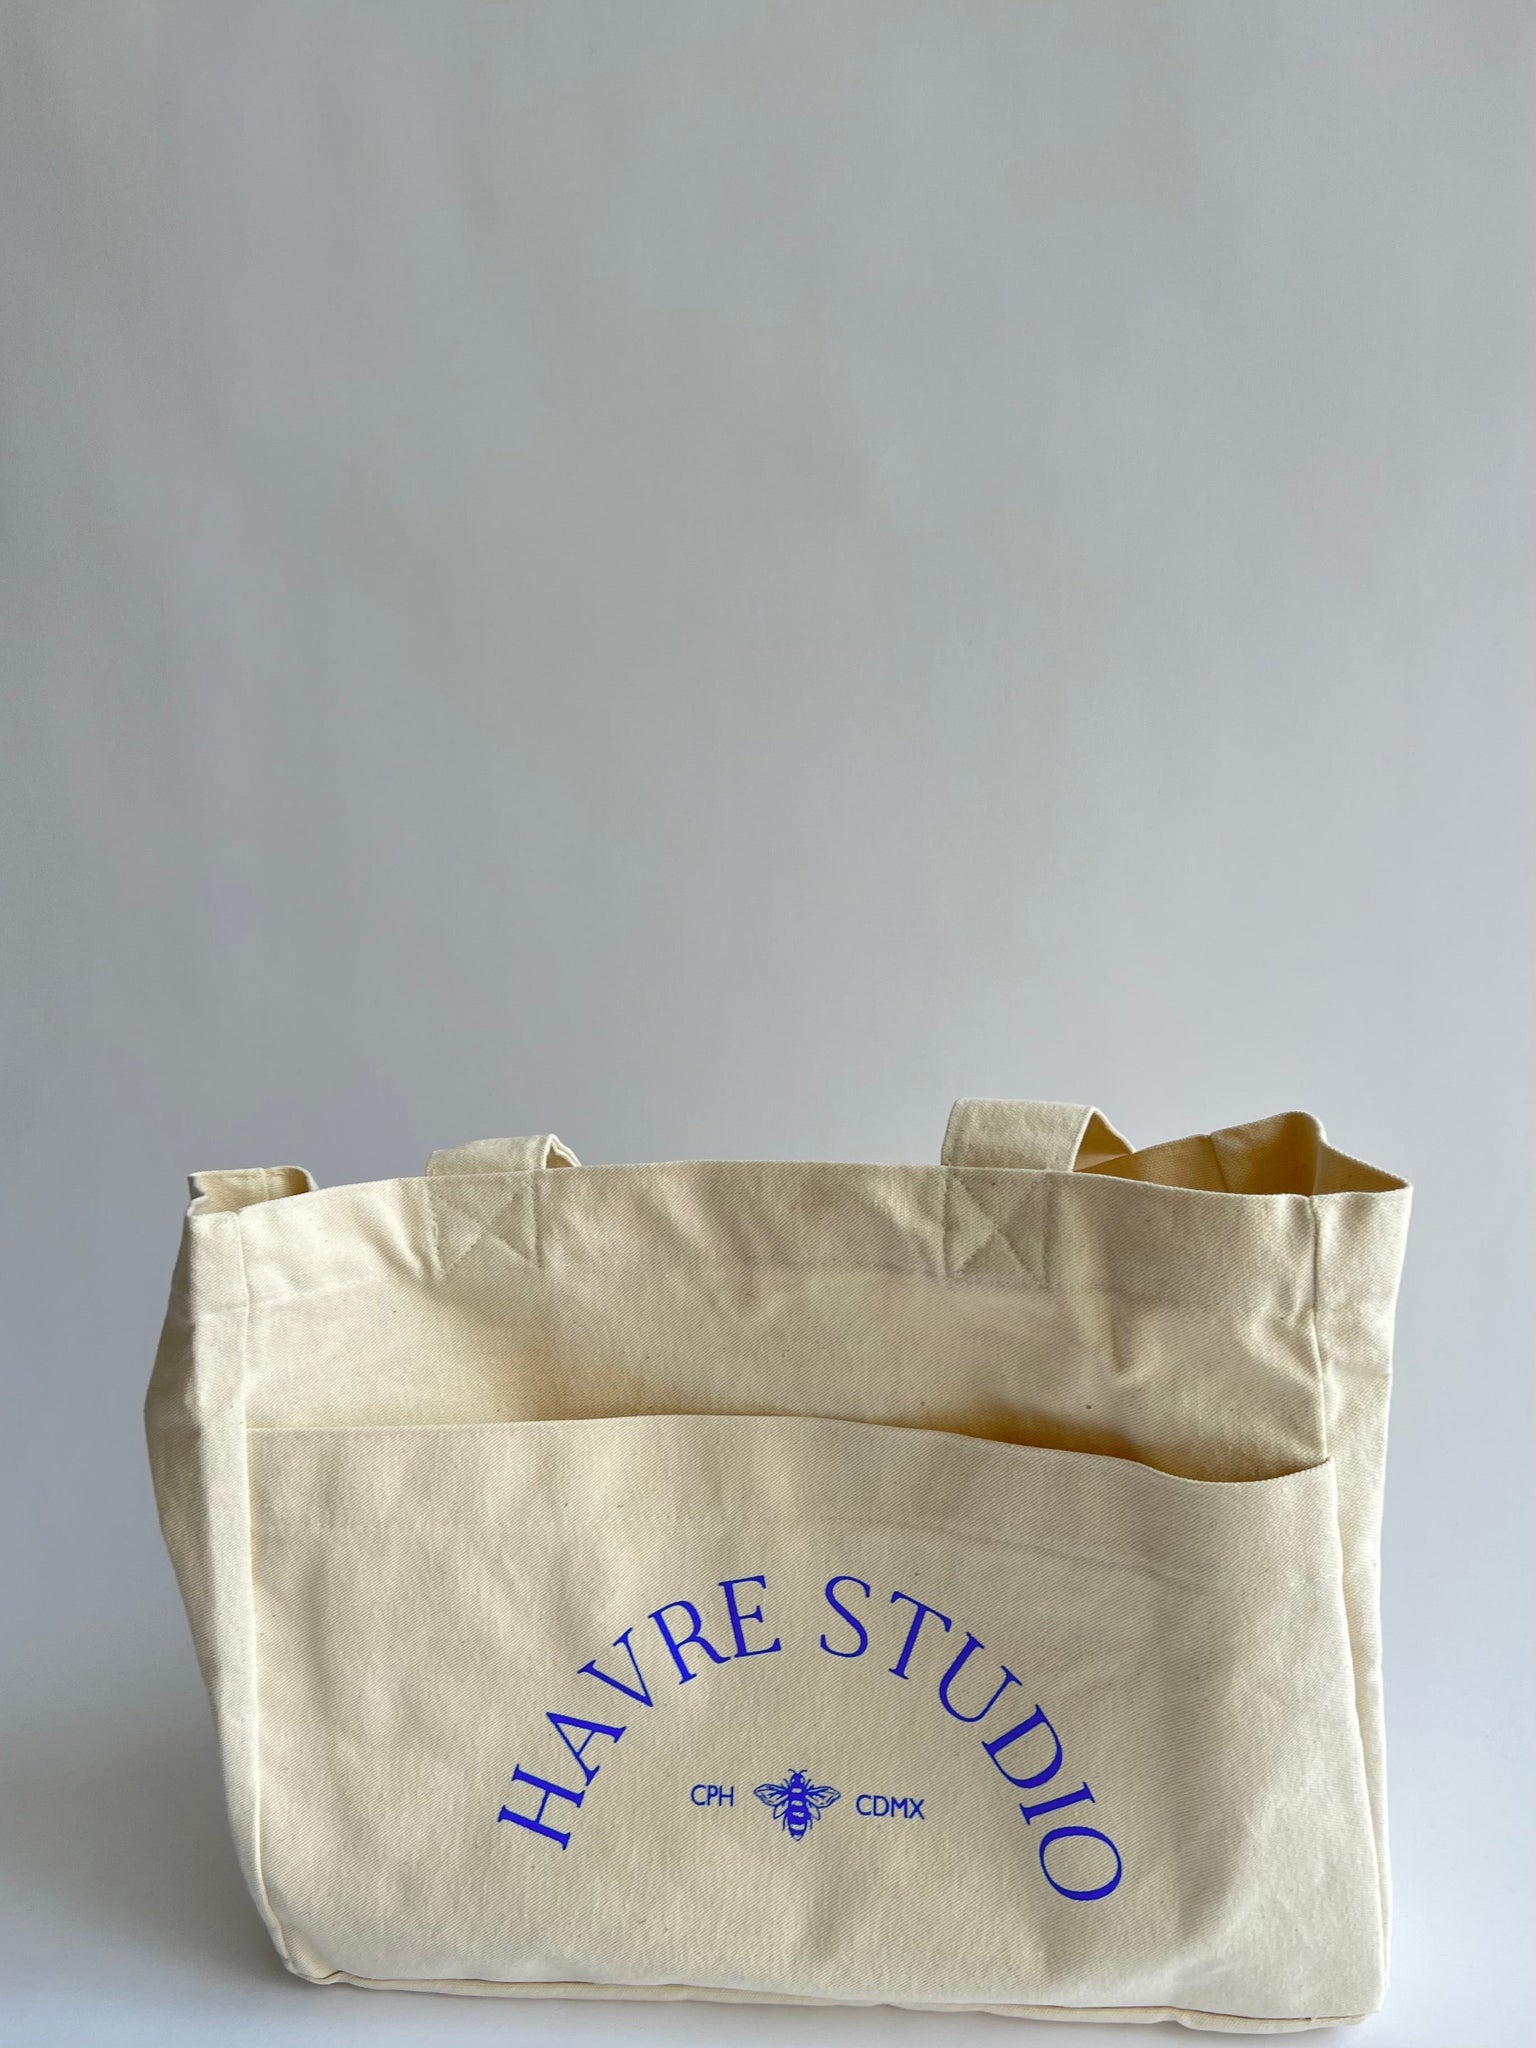 Havre Studio Tote with 5 pockets/spaces